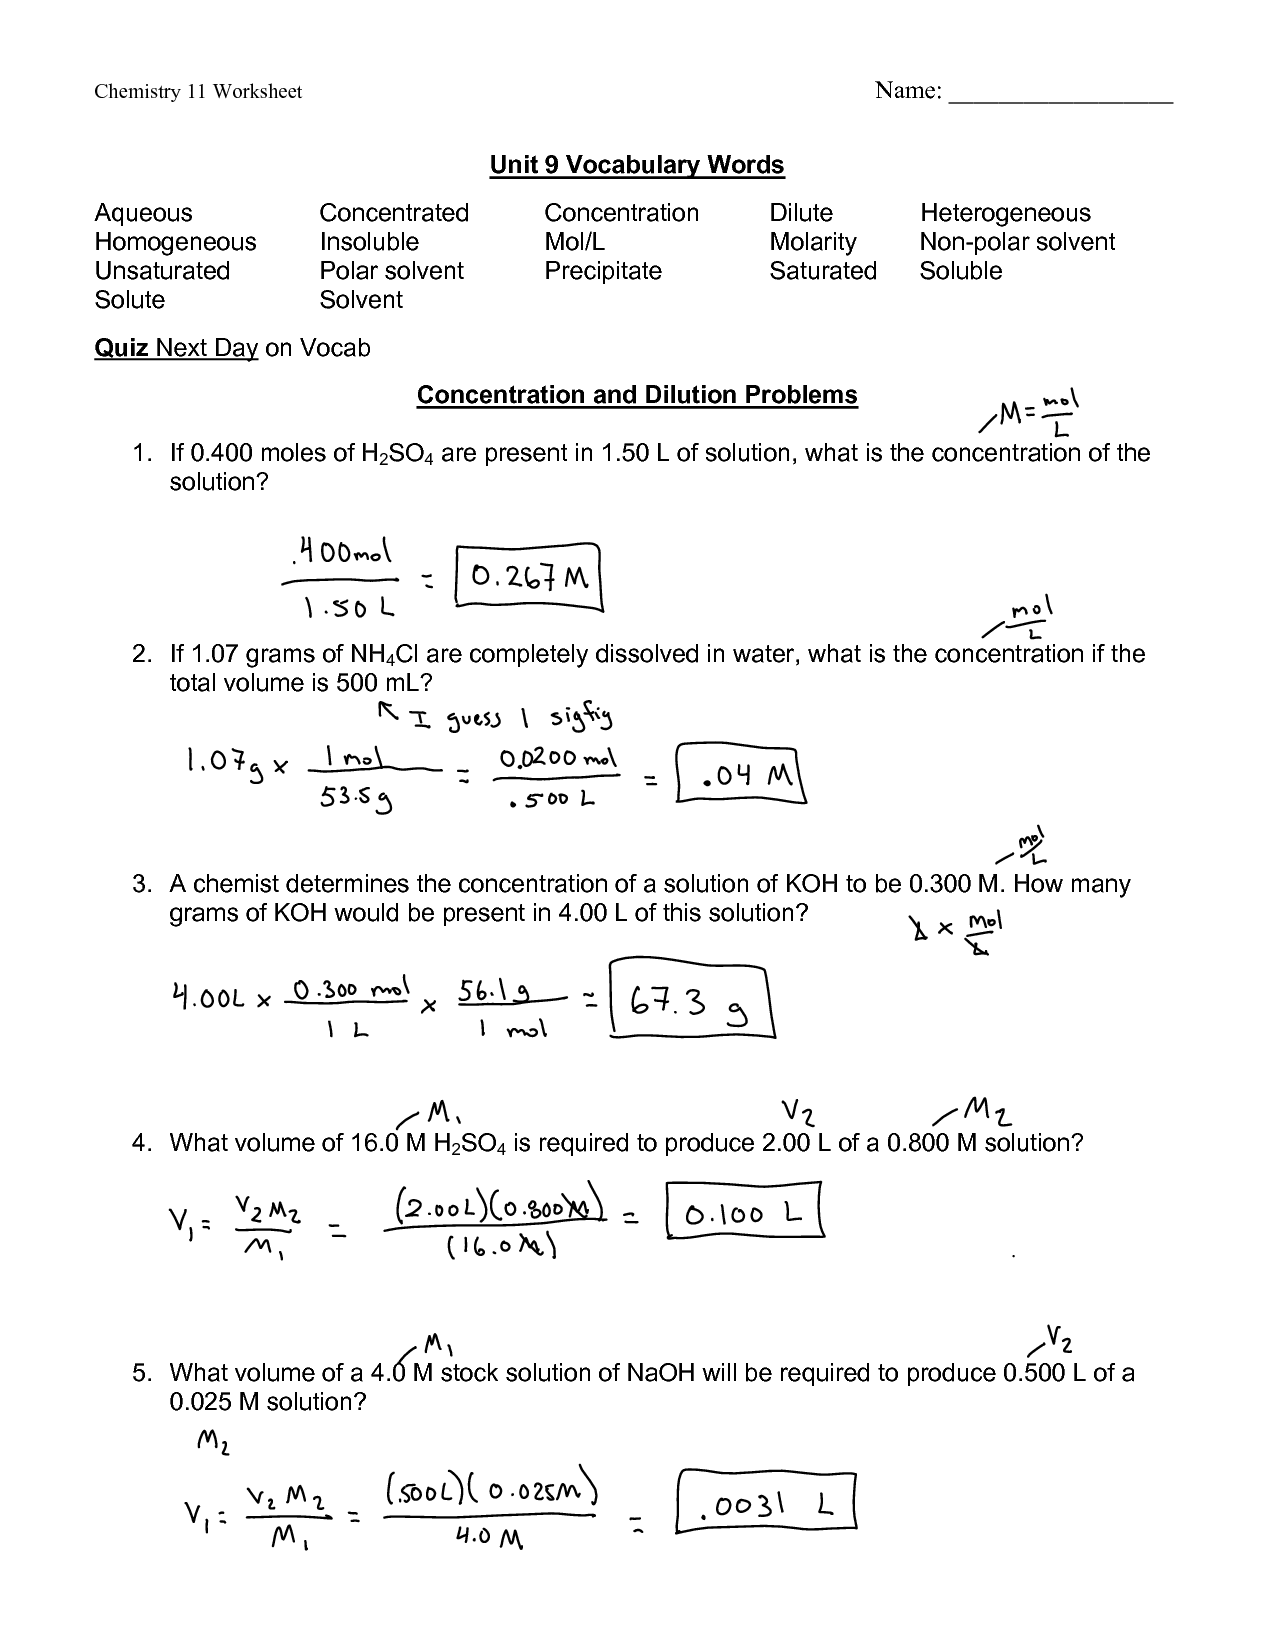 solutions-concentration-worksheet-driverlayer-search-engine